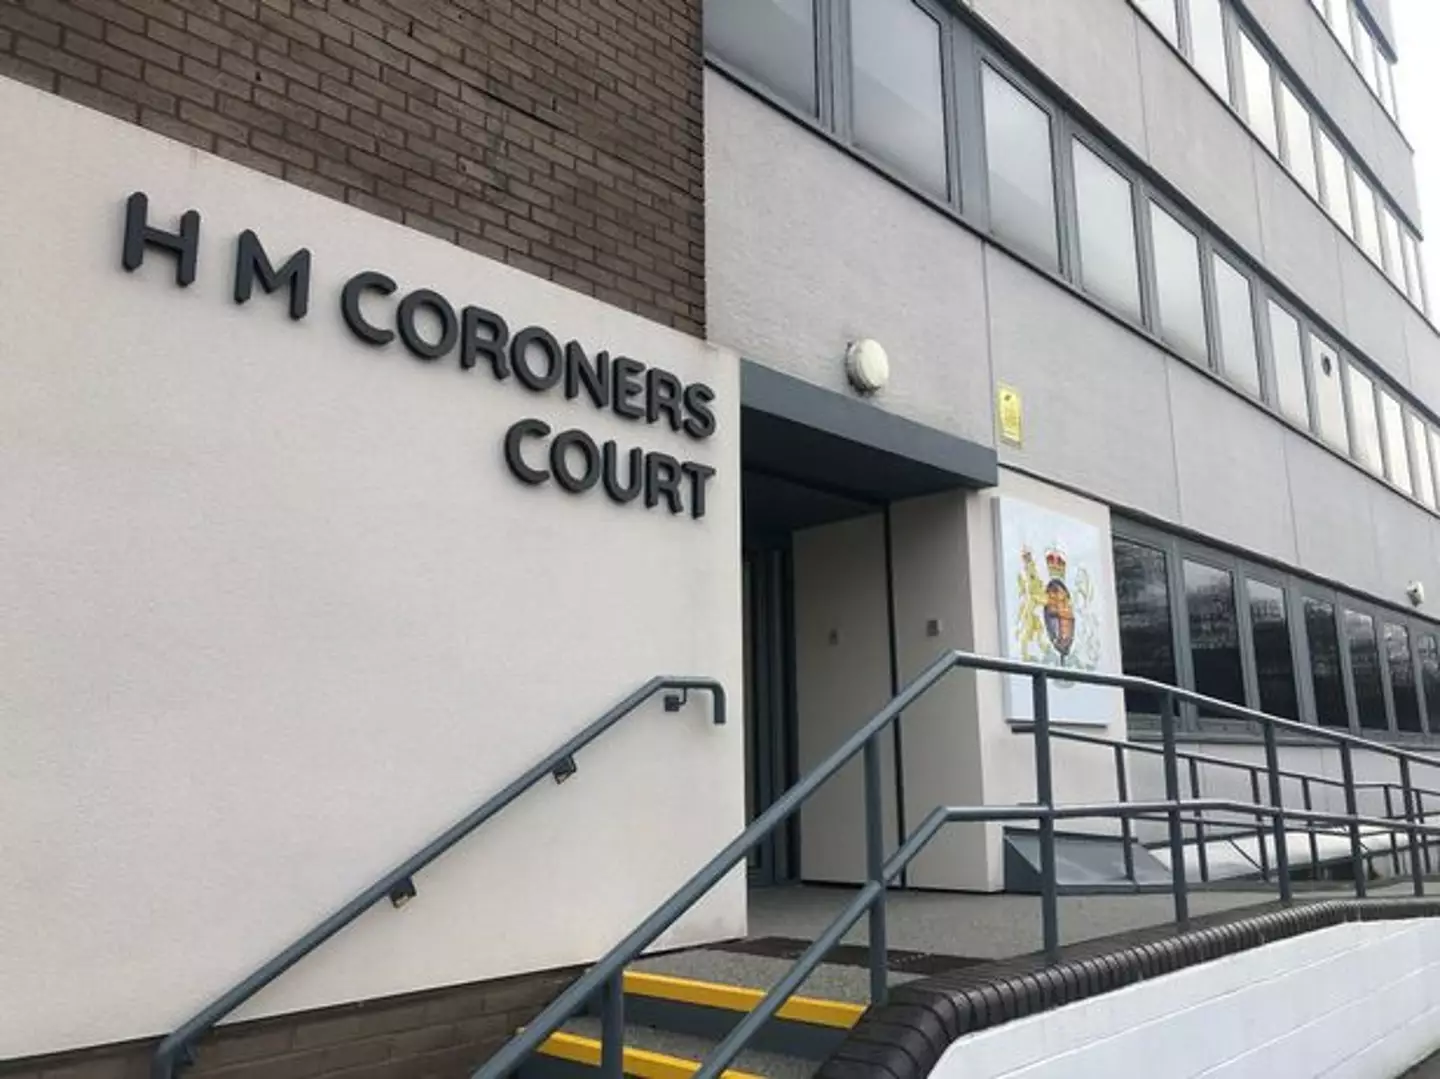 An inquest into the death and the days leading up to it was held at Rochdale Coroner’s Court.